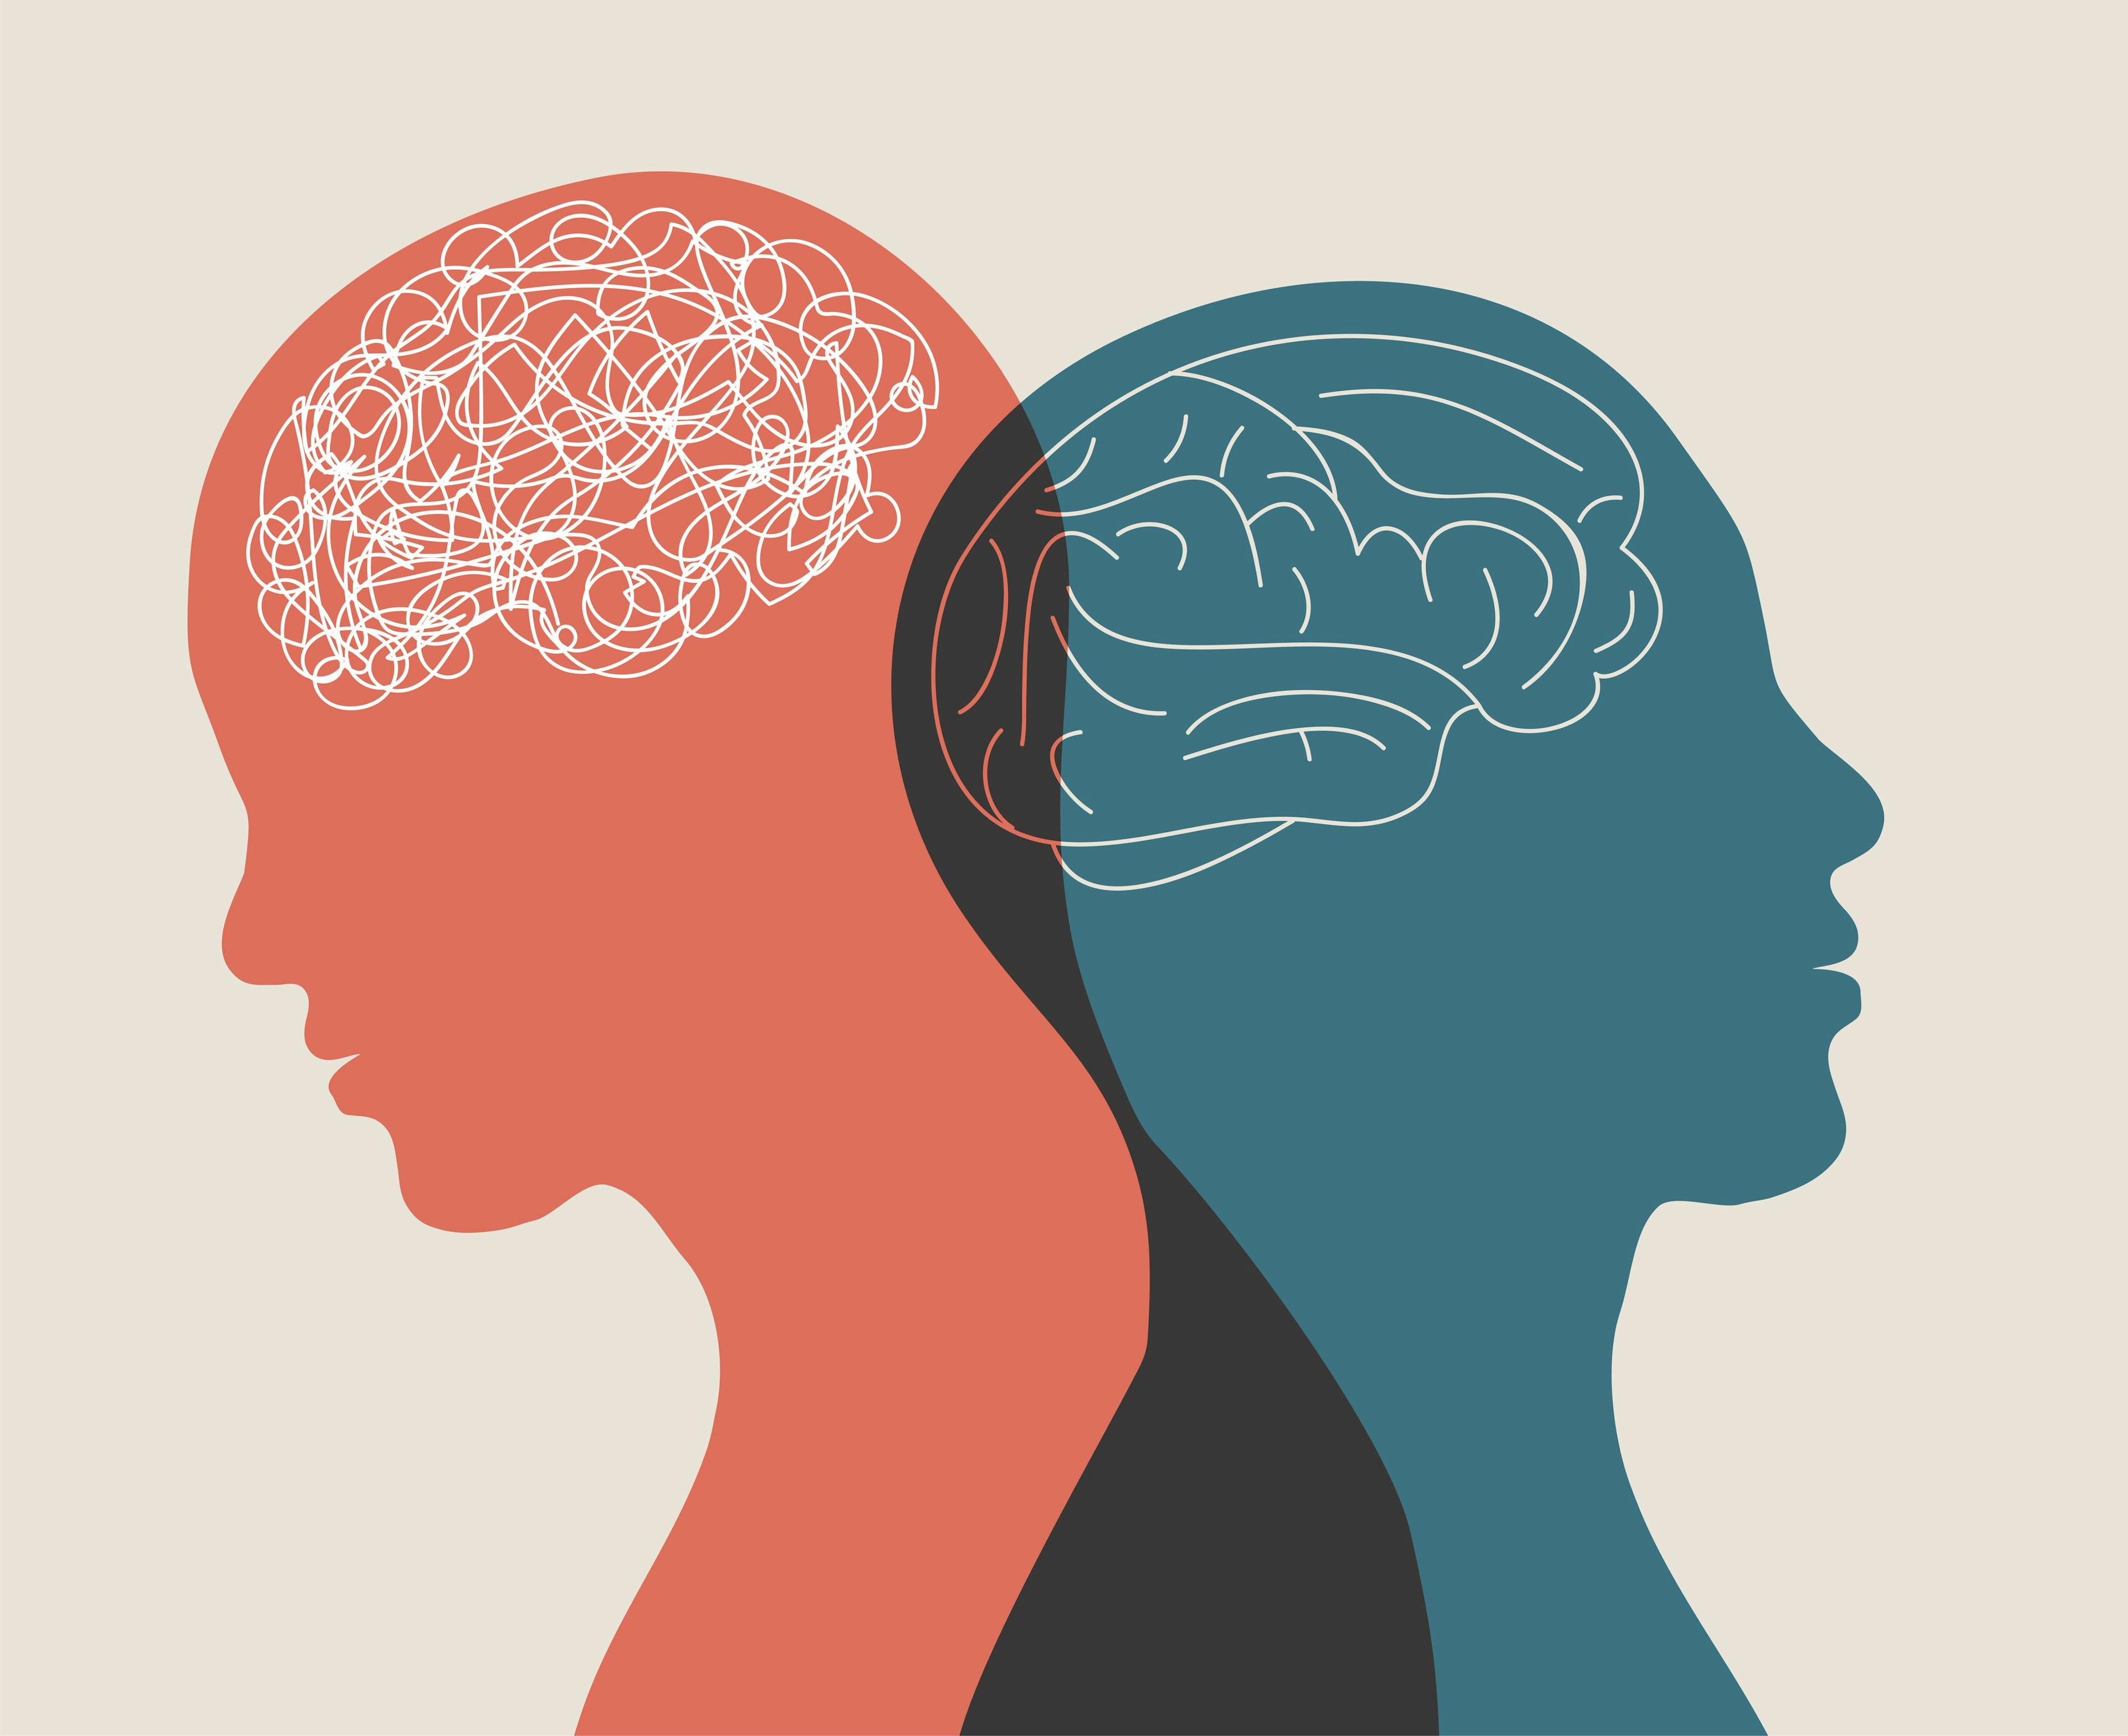 Metaphor bipolar disorder mind mental. Double face. Split personality. Concept mood disorder. 2 Head silhouette.Psychology. Mental health. Dual personality concept. Tangle and untangle | Image credit: Melita - stock.adobe.com